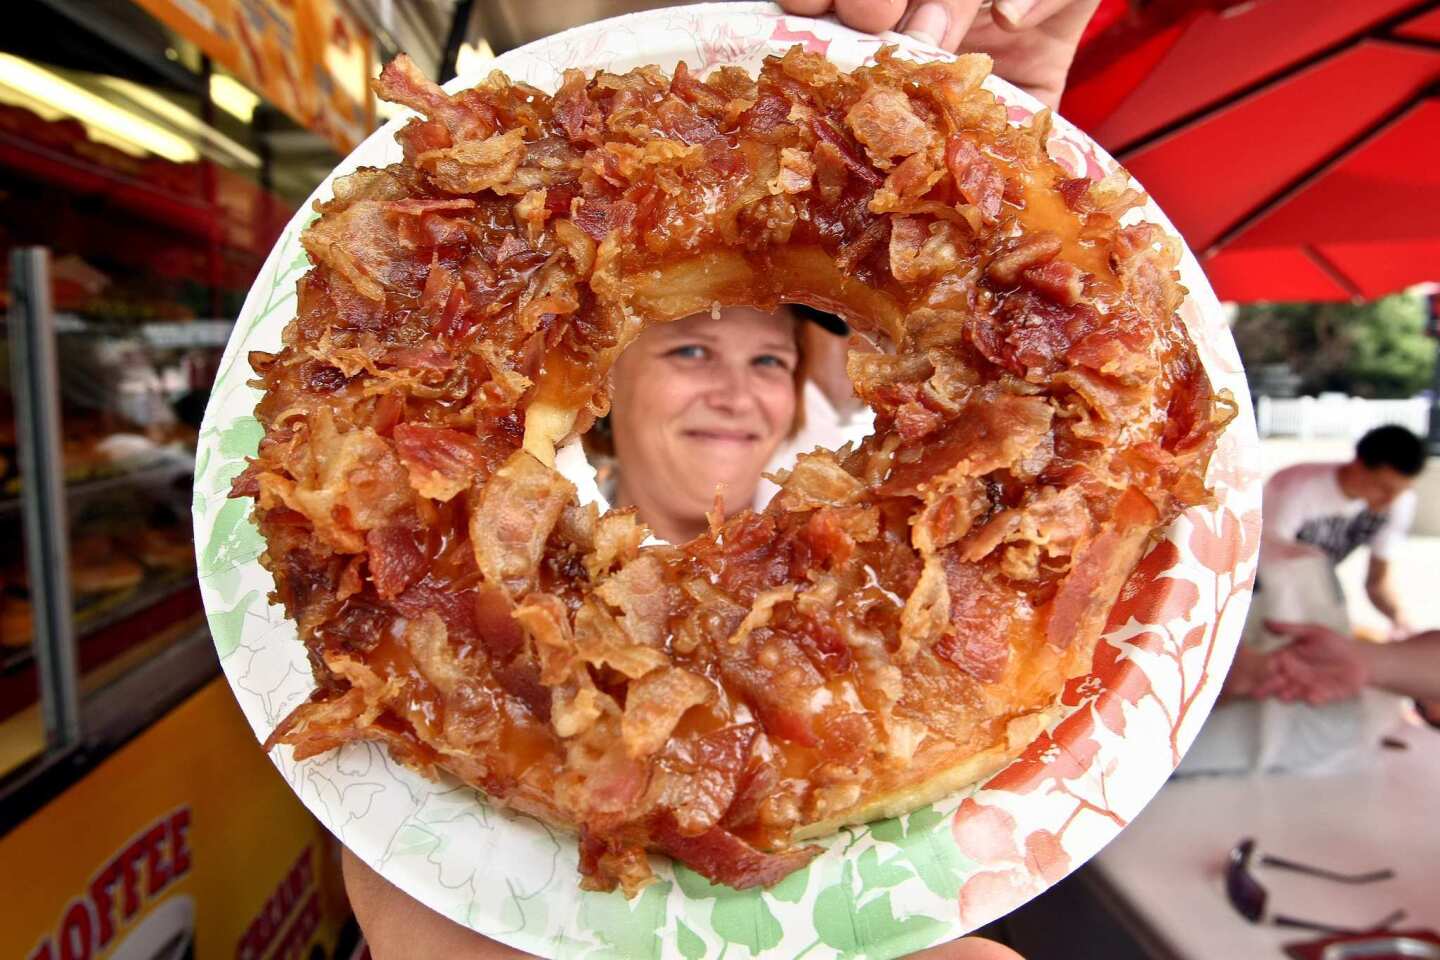 Barbie Holley displays a maple bacon doughnut on the menu at the Texas Donuts stand at the Los Angeles County Fair in Pomona. The maple bacon doughnut consists of a Big D glazed doughnut, warm maple icing and hickory smoked bacon.